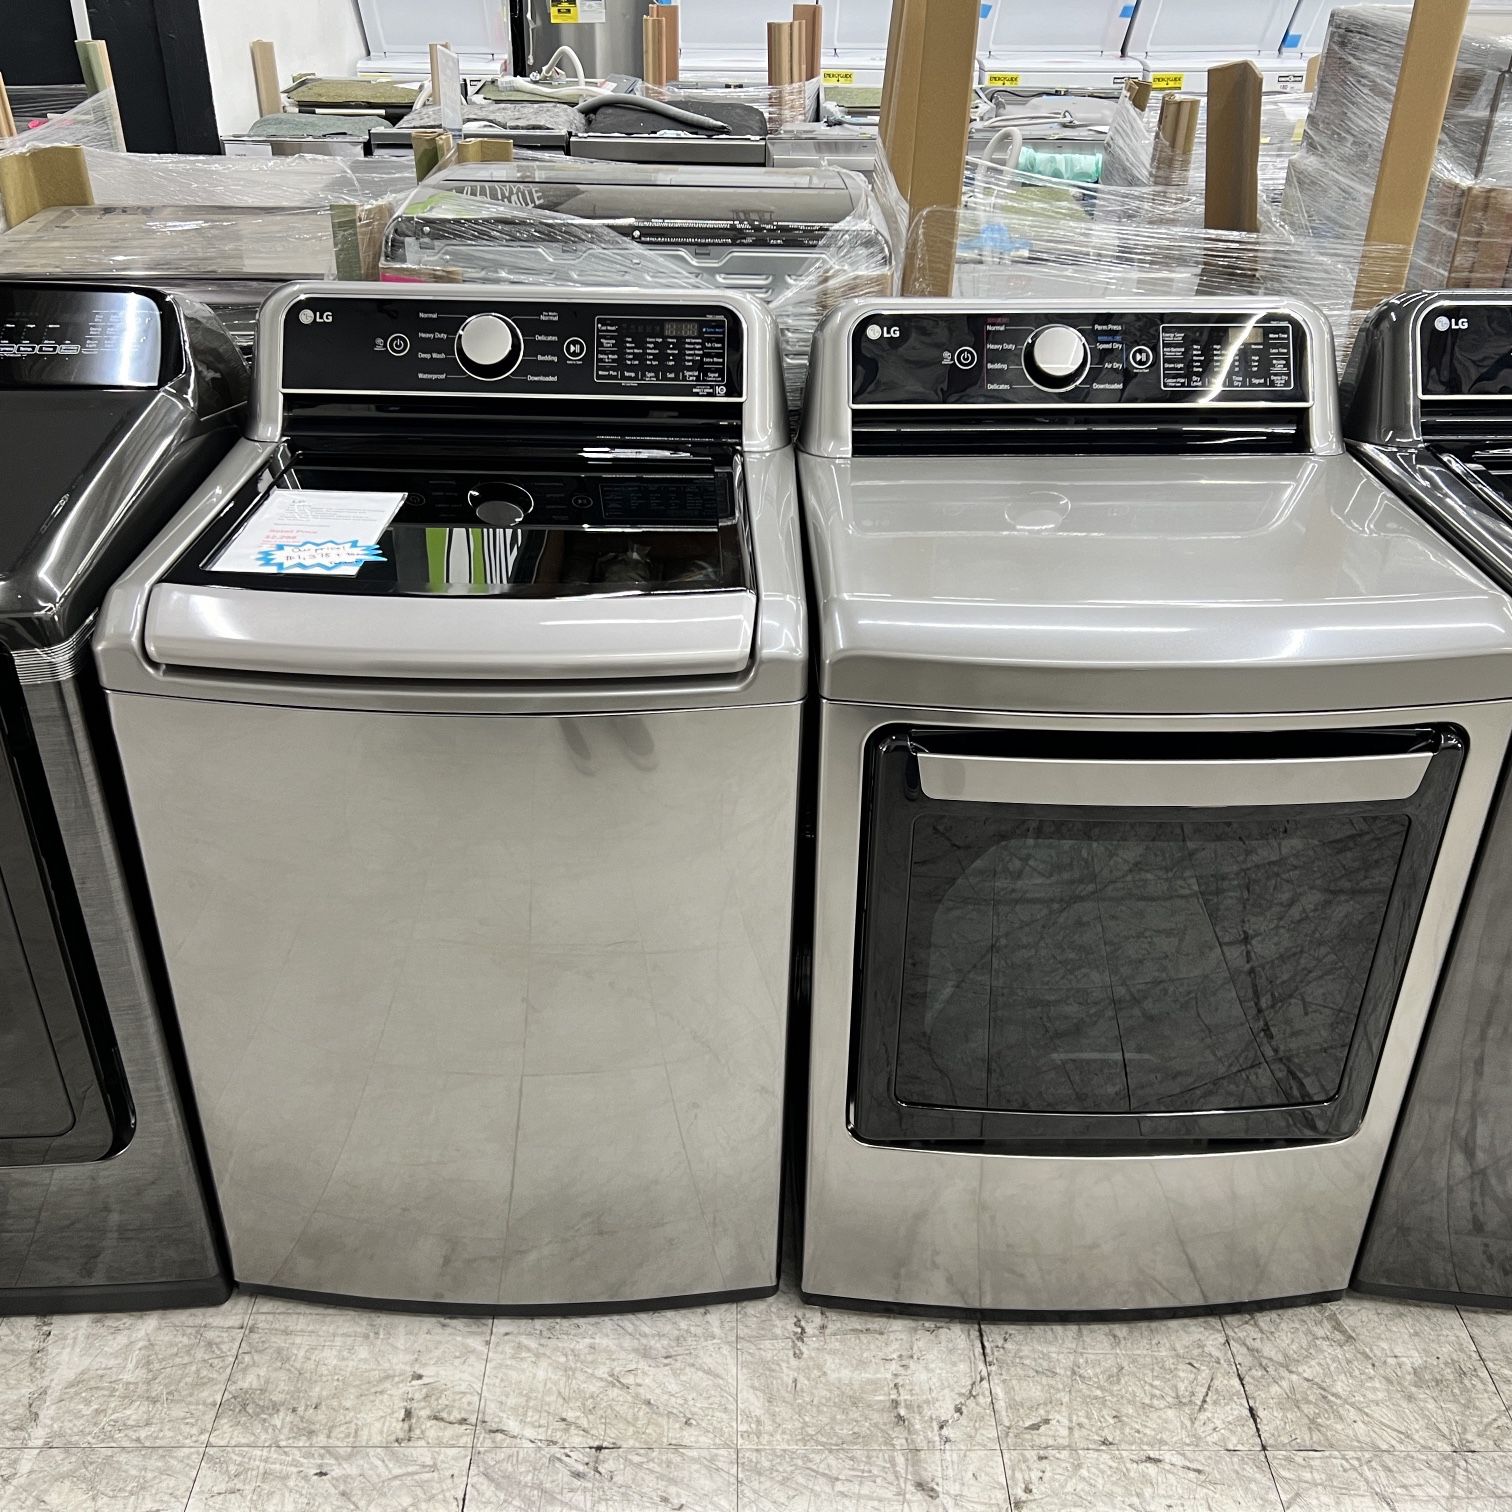 LG 5.5 cuft Top Load Mega Capacity washer and dryer in graphite steel 